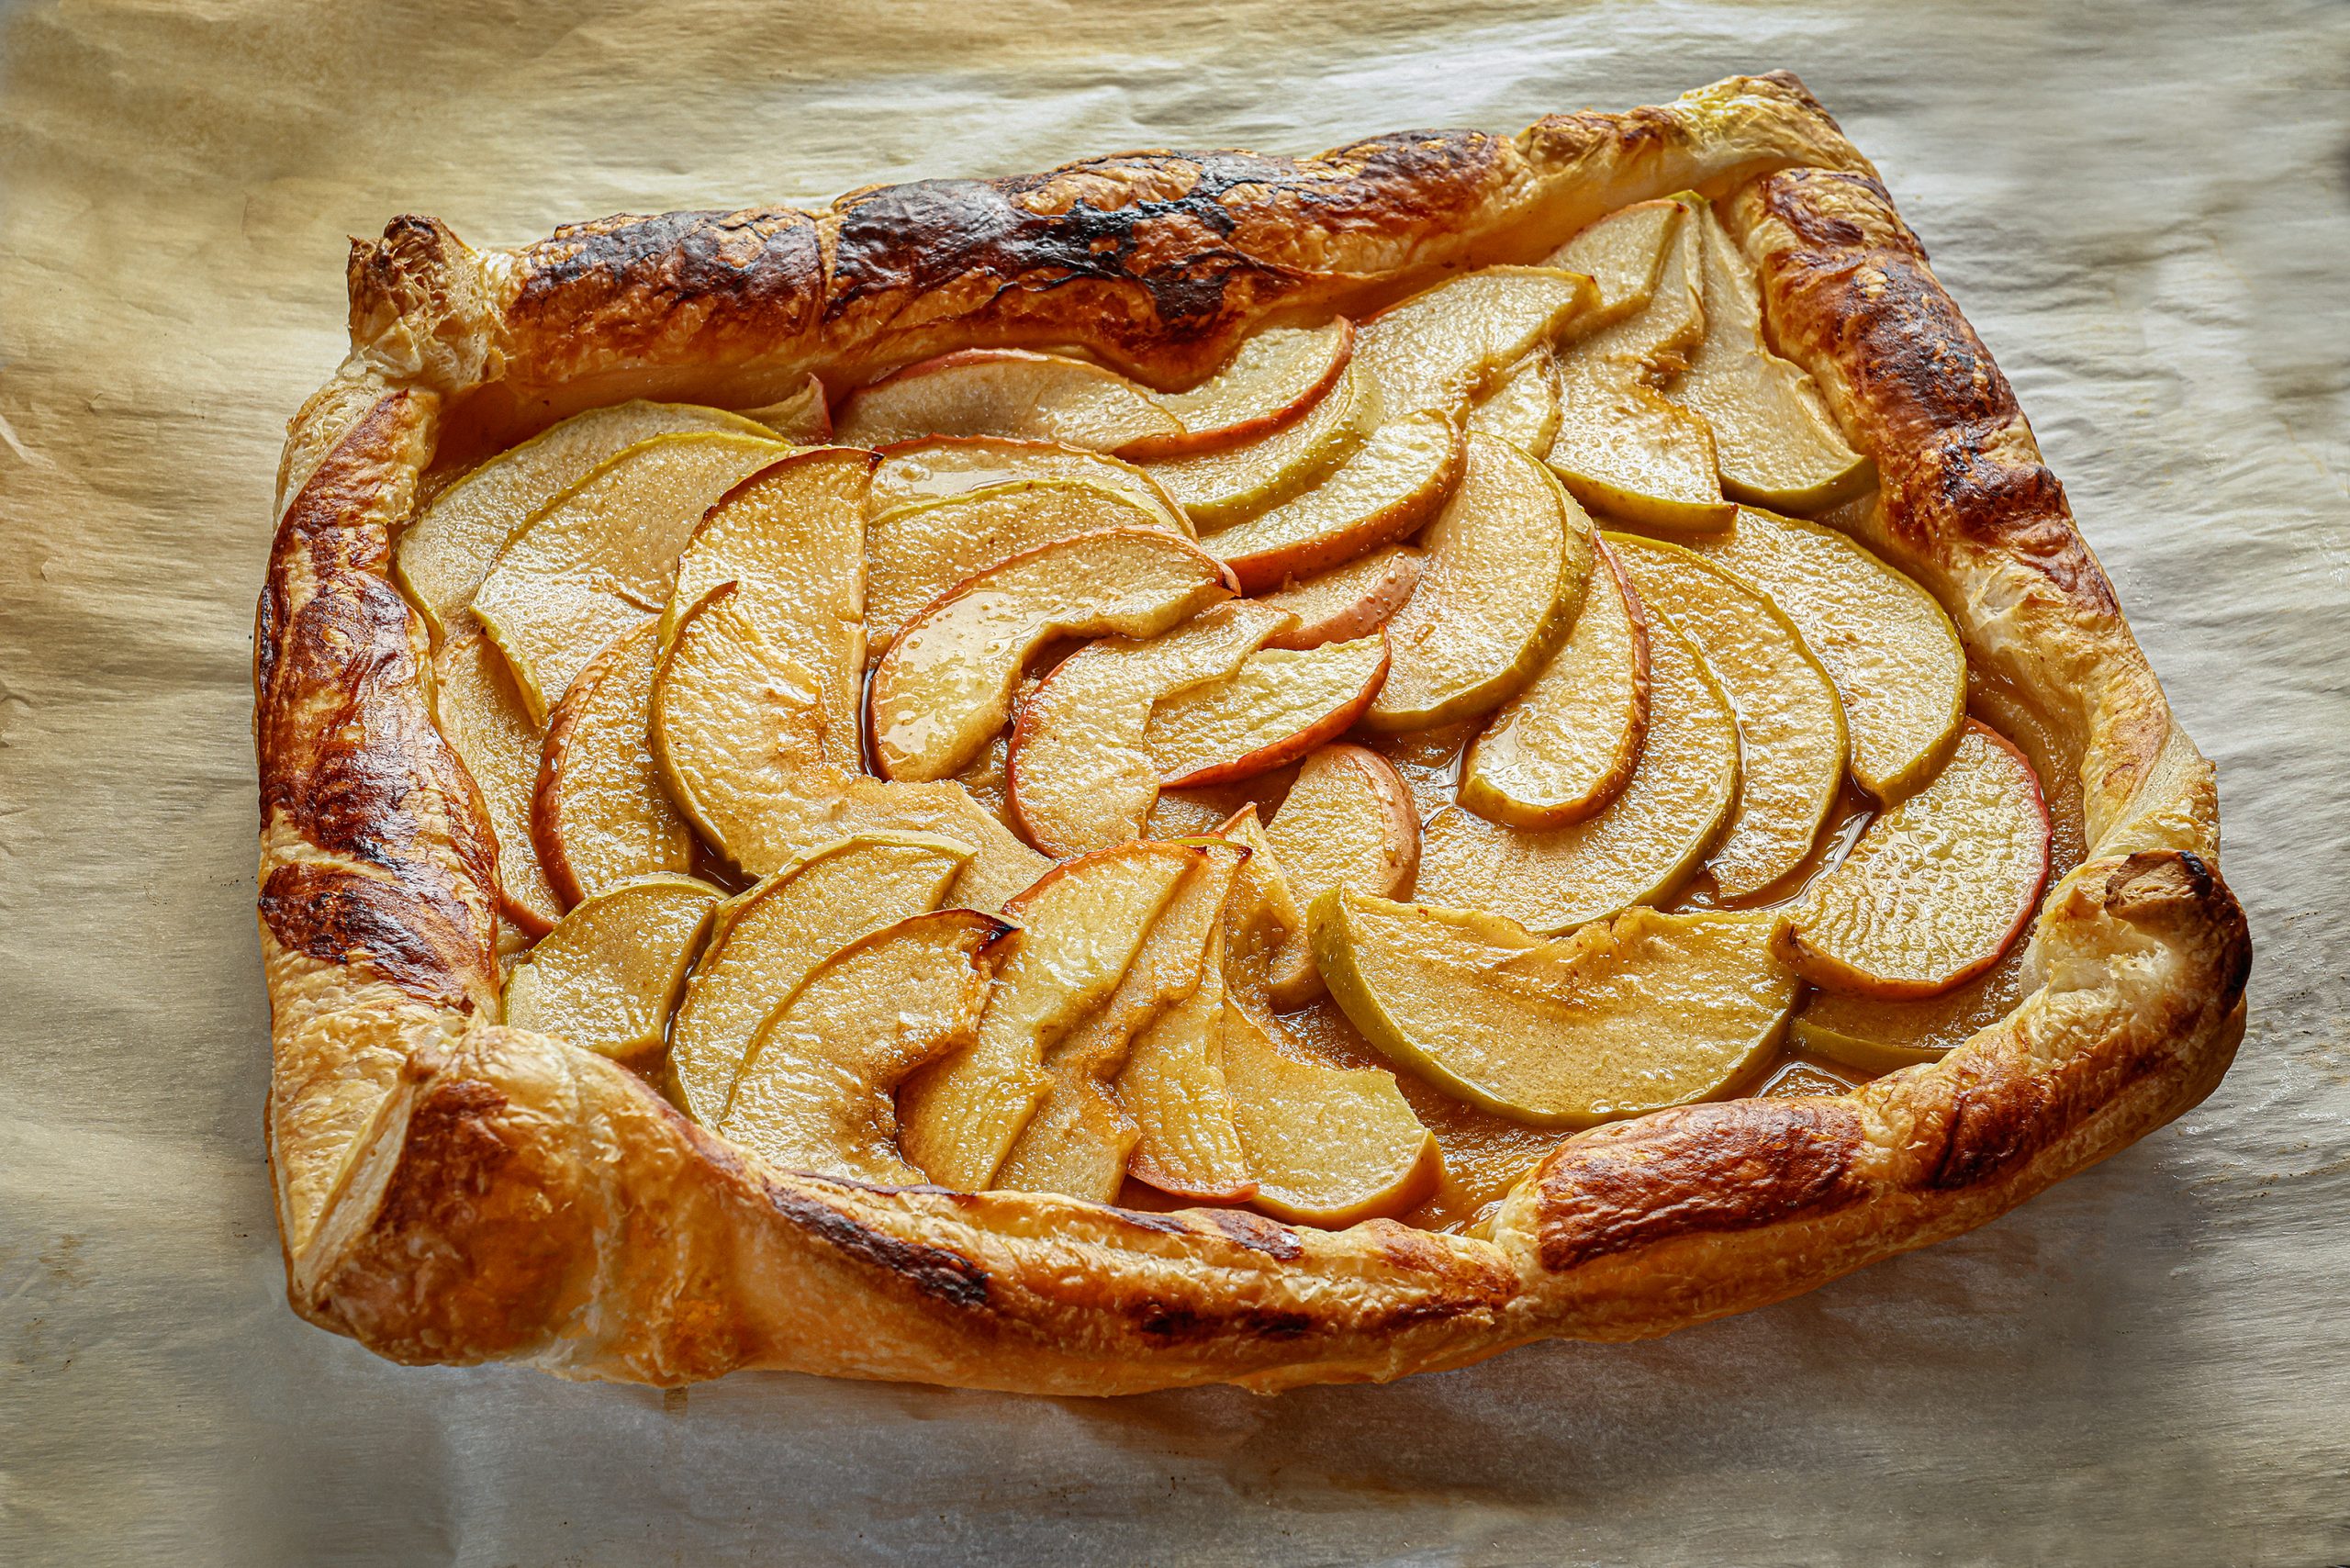 The Simple Apple Tart is deceptively easy and so delicious with the simplicity of buttery, flaky pastry, and sweet tart apples. Using store-bought puff pastry, you can prepare a quick, low-labor dessert that will impress your guests. Substitute pears, peaches, or plums for the apples as the seasons and menu change.